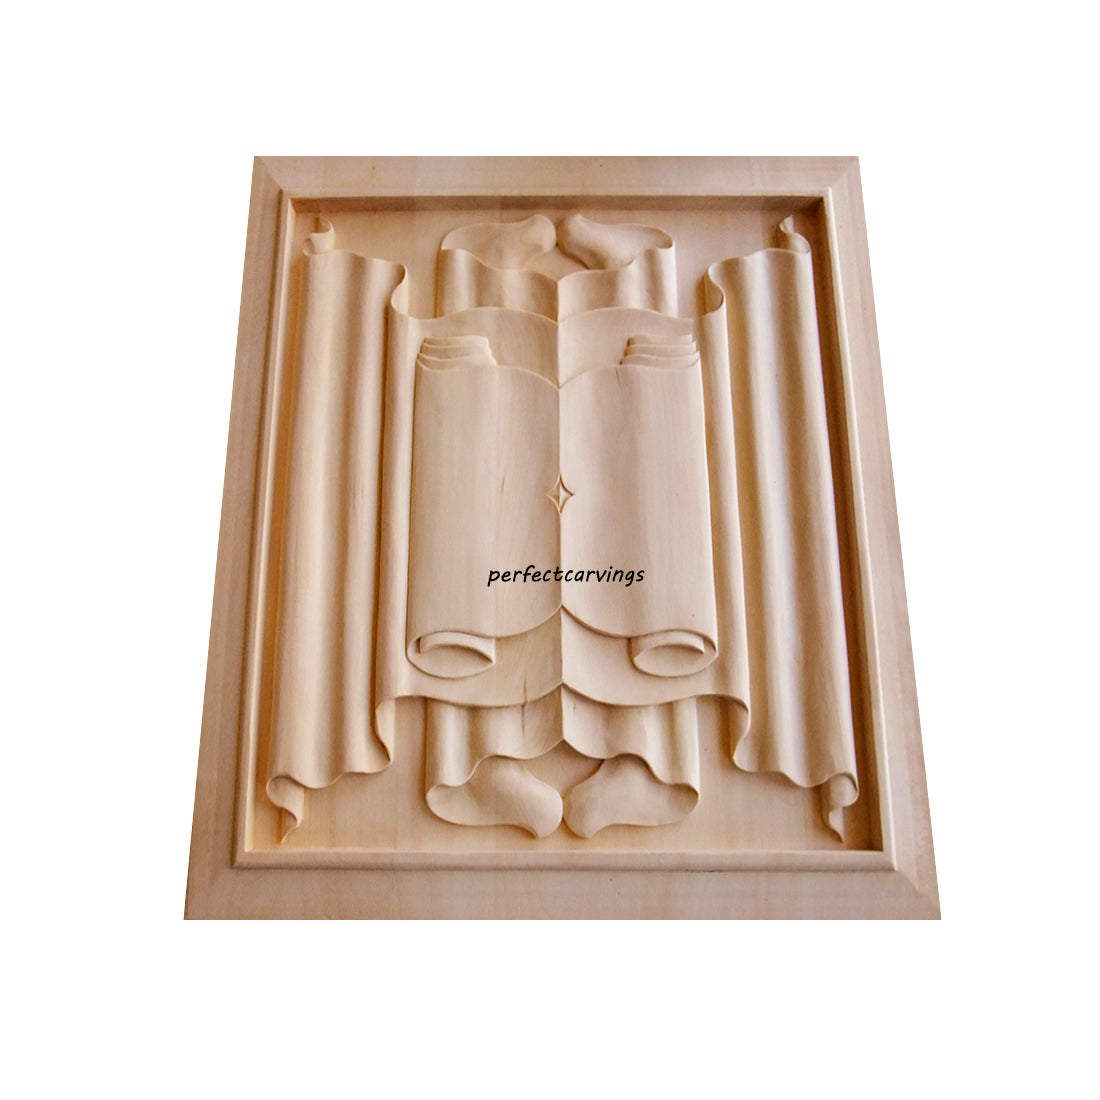 PAIR of PNL-04 Wood Carved Linenfold Raised Panels, Available in 2 Sizes